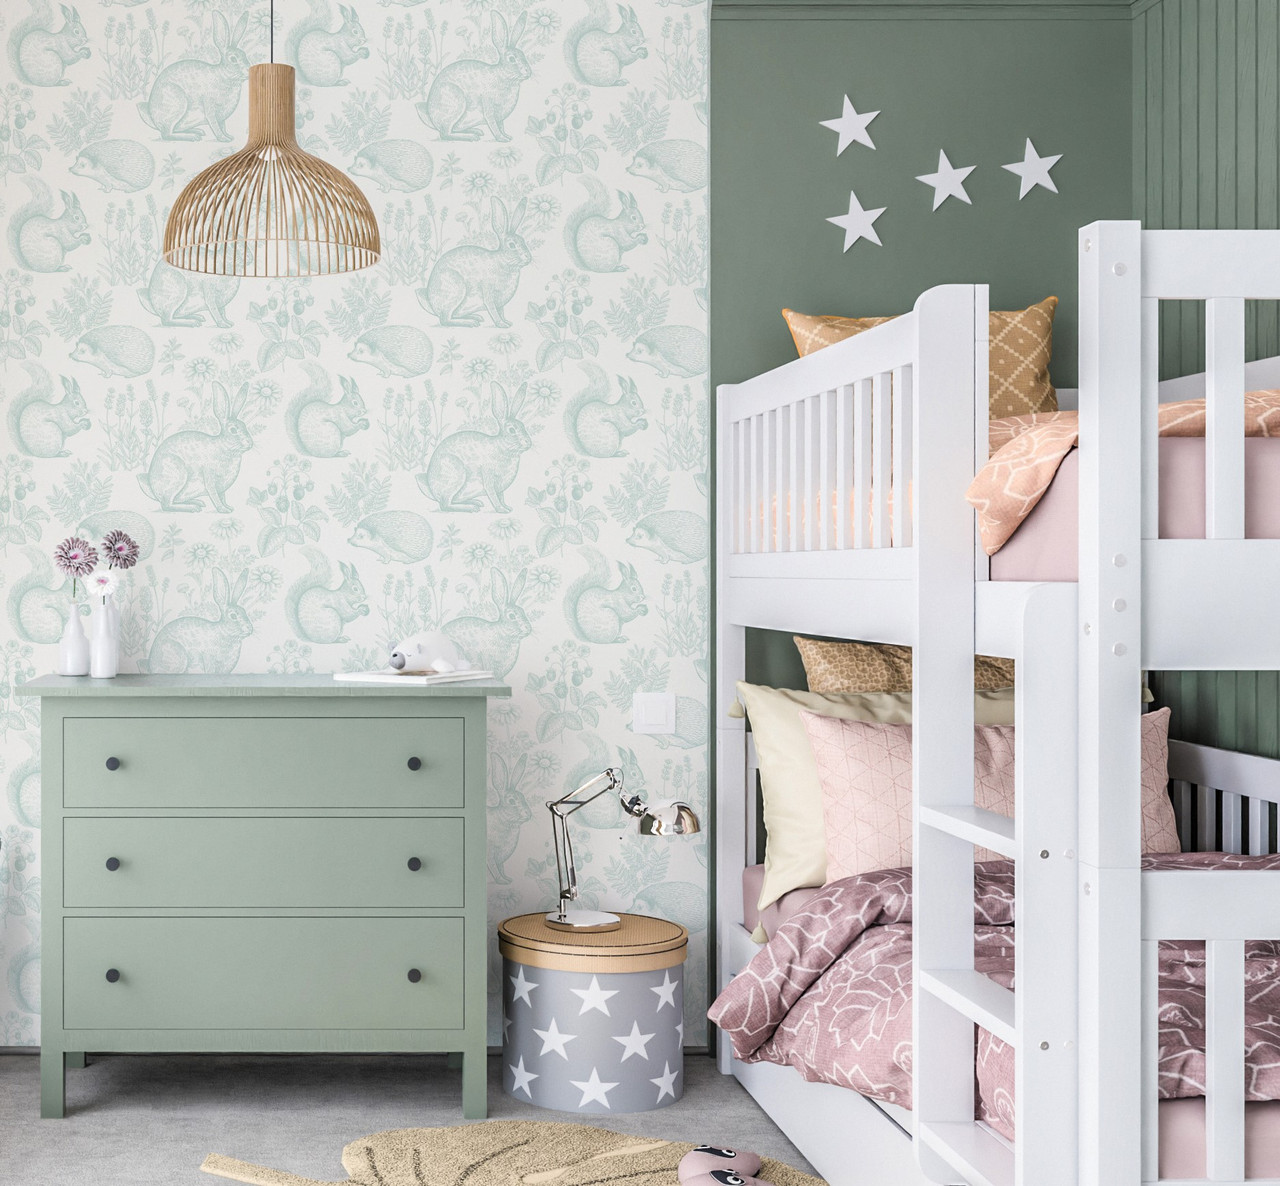 Removable Deer Fawn Woodland Nursery Wallpaper Temporary Peel and Stic   Fireflies Designs